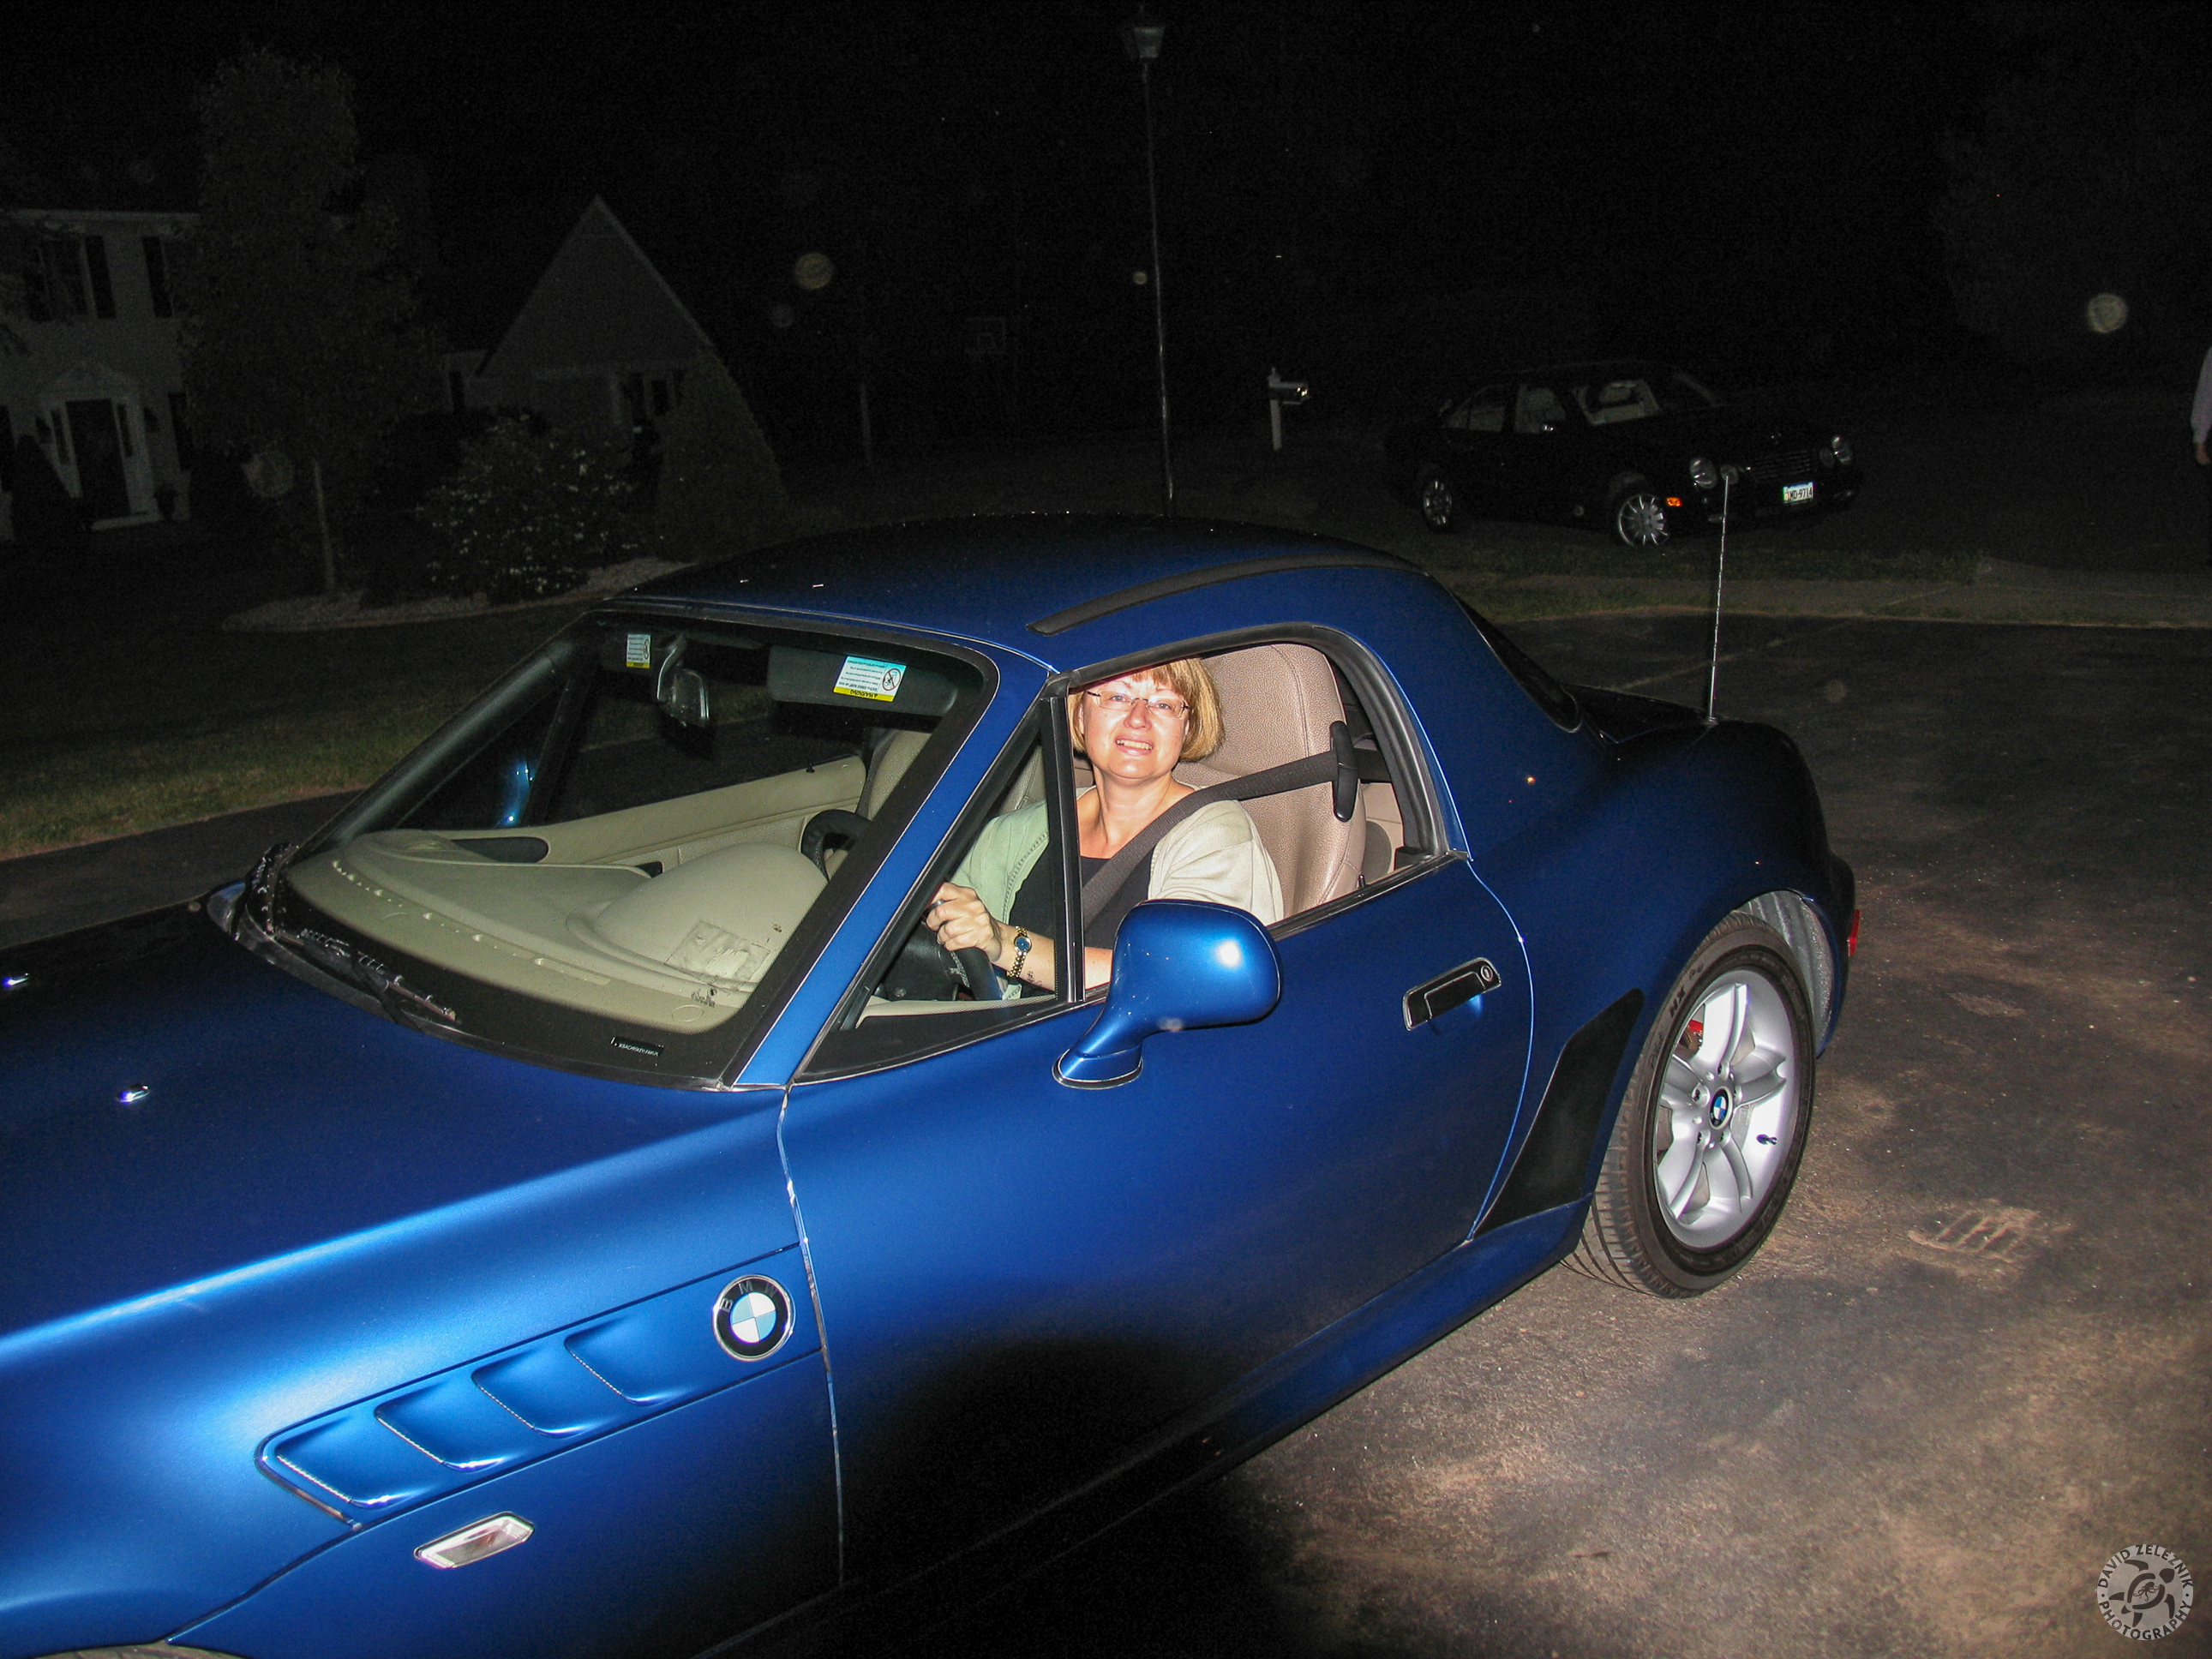 Z3ByeBye-004 While Jim puts the plates on, Karen enjoys her new ride! I put the hardtop on despite the beautiful evening so that they could get it home. as well as learn how to install it.